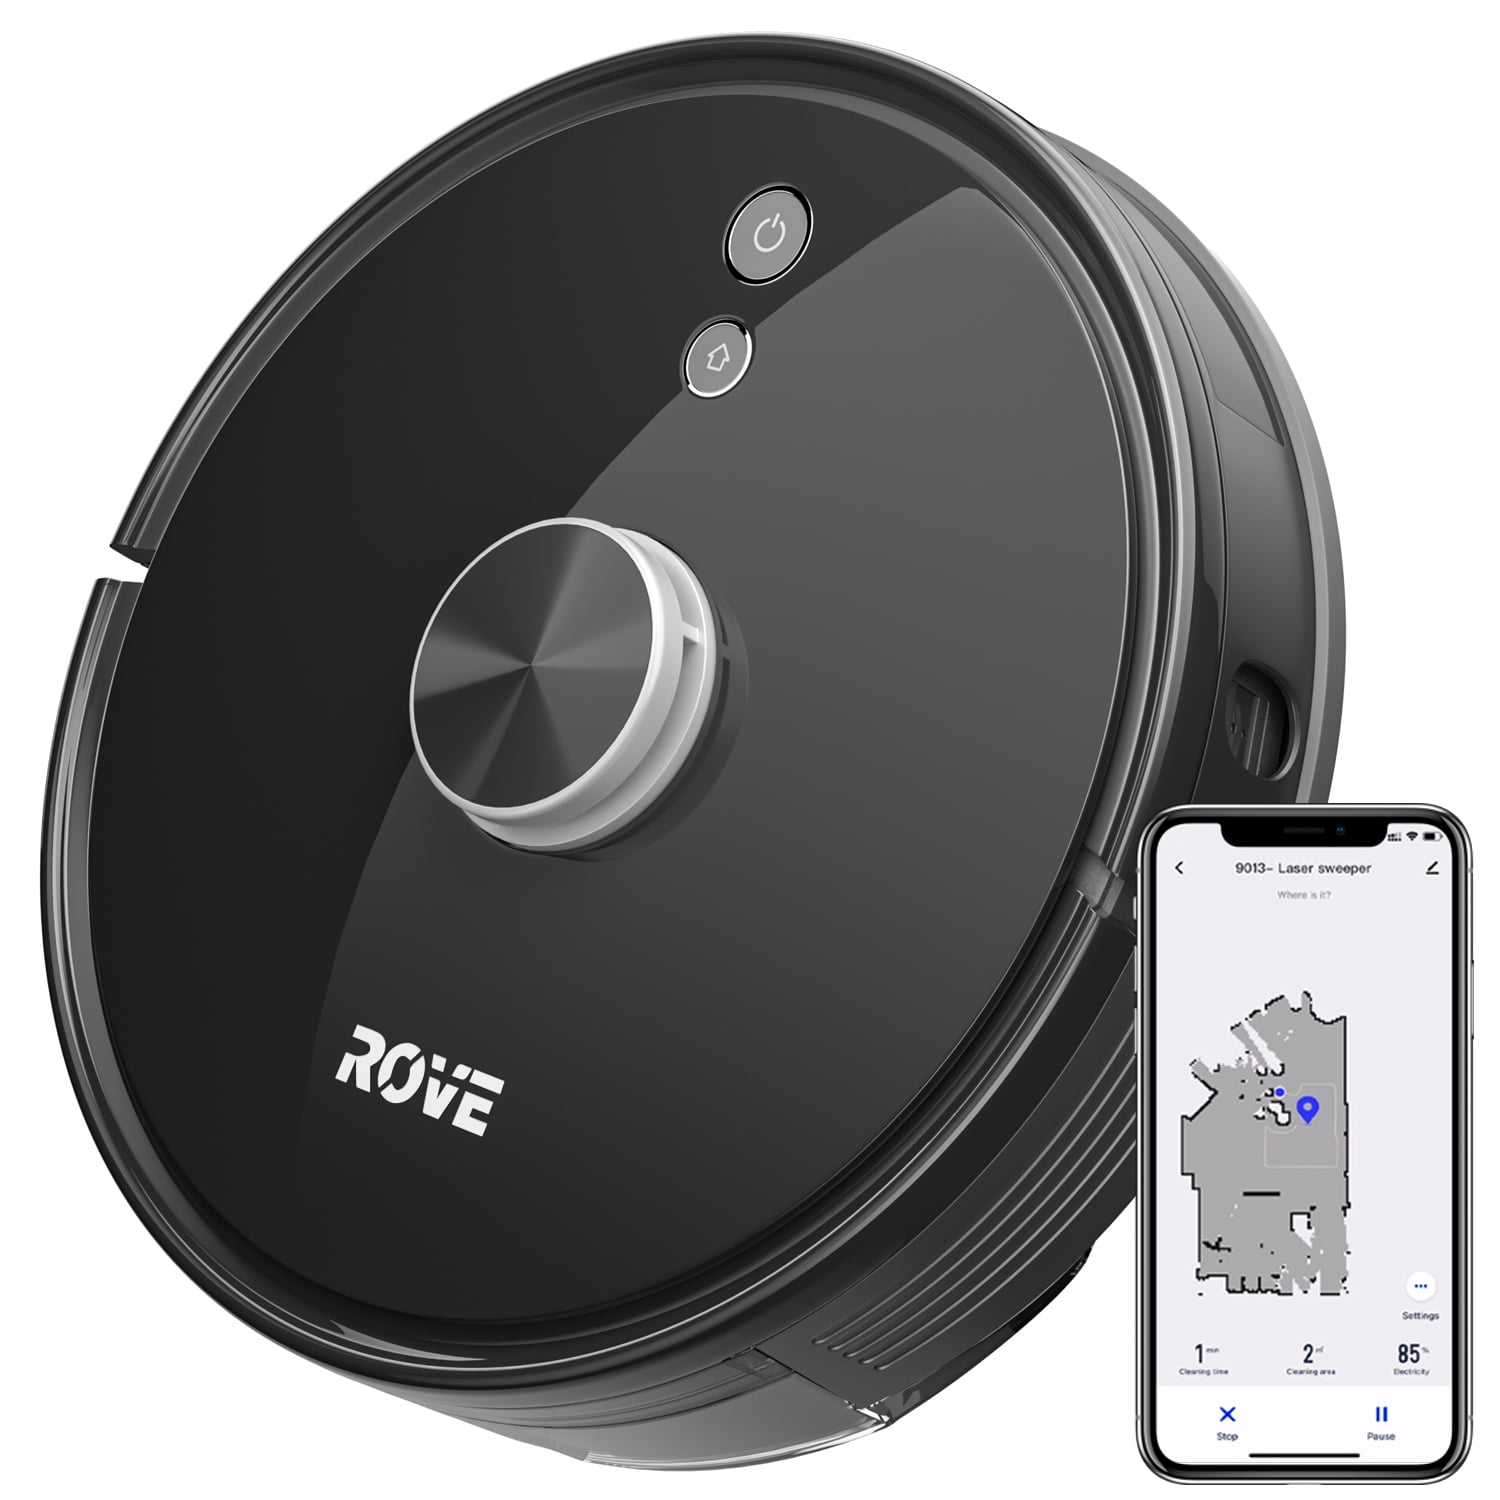 Rove Robot Vacuum Sweeping Cleaner - 2000 Pa Strong Suction & 2600mAh Battery Life Robotic Sweeper, Automatic Self Charging, Lidar Navigation, Smart Mapping, Perfect for Pet Hair Carpets, Hard Floors